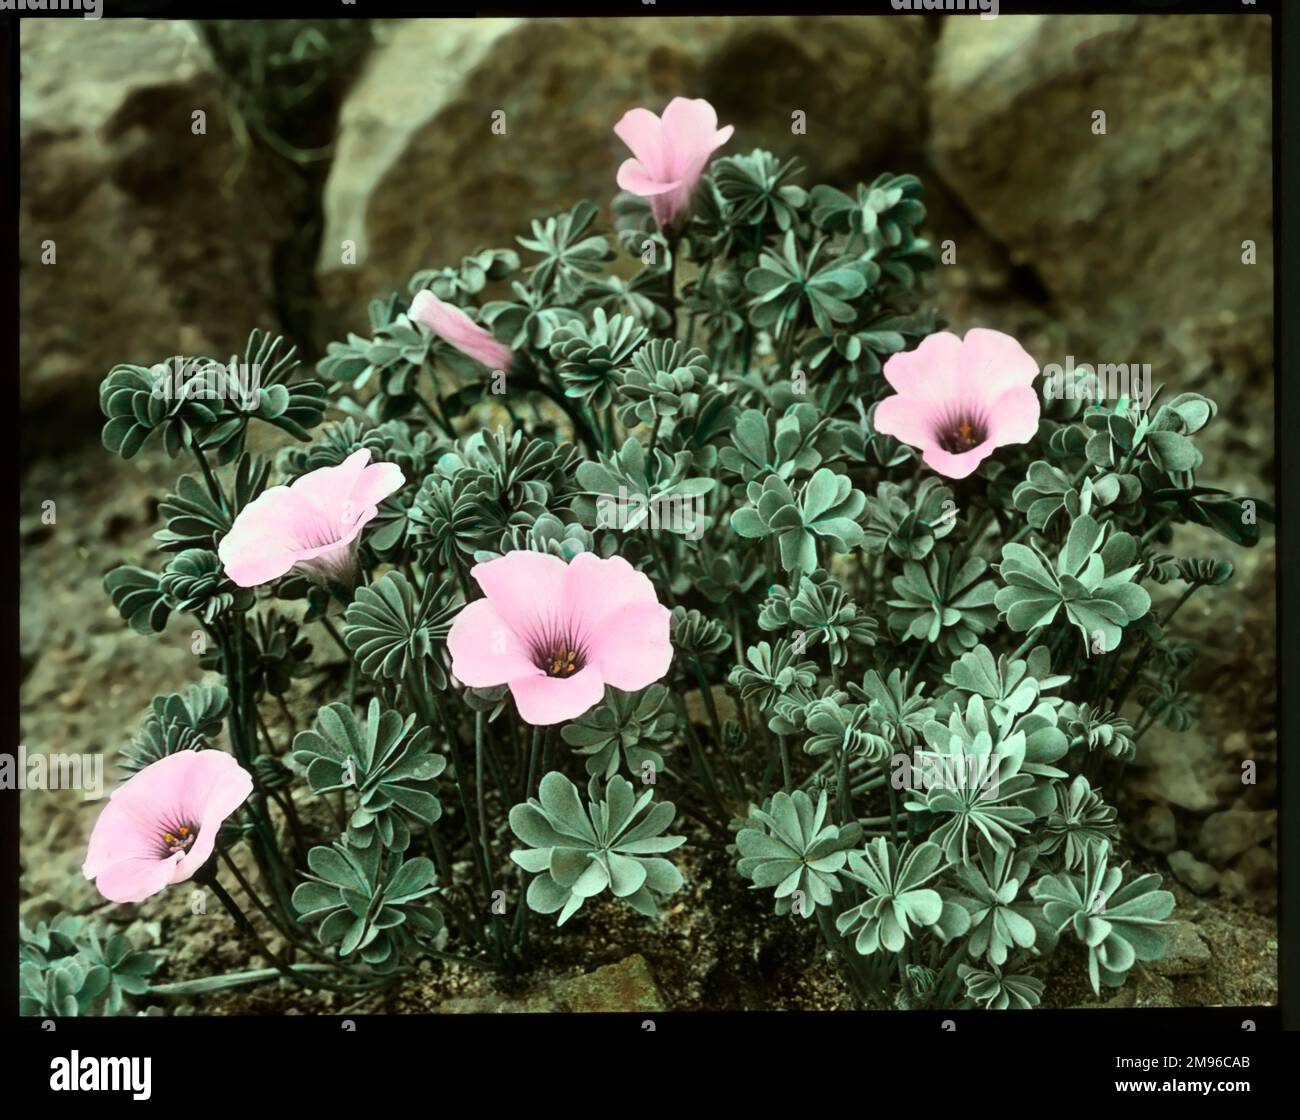 Oxalis Crassipes Rosea (Strawberry Oxalis, Wood Sorrel), a perennial flowering plant of the Oxalidaceae family, with rose-pink flowers.  Seen here growing in a rocky setting. Stock Photo